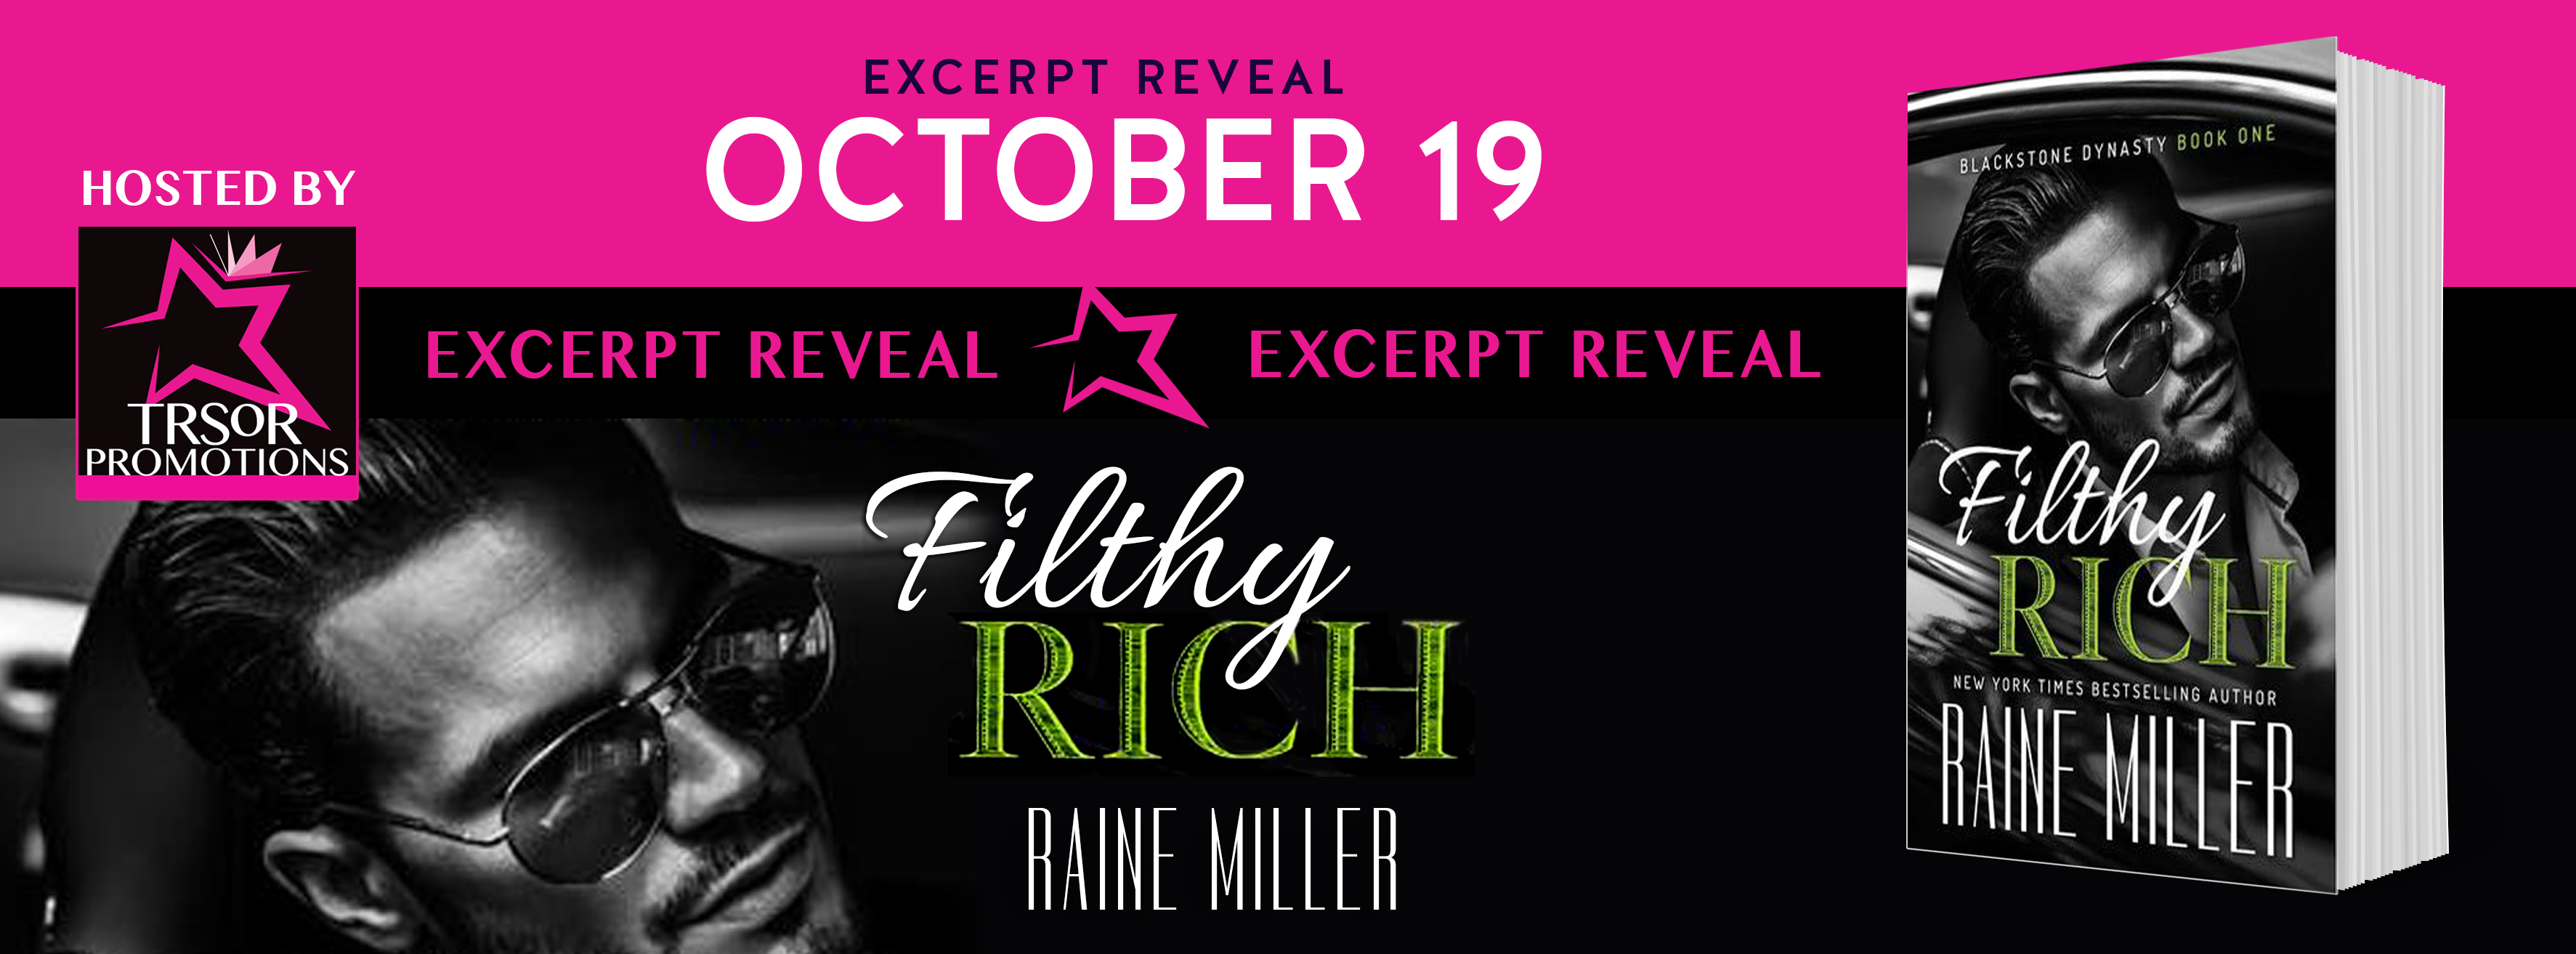 Filthy Rich by Raine Miller #ExcerptReveal